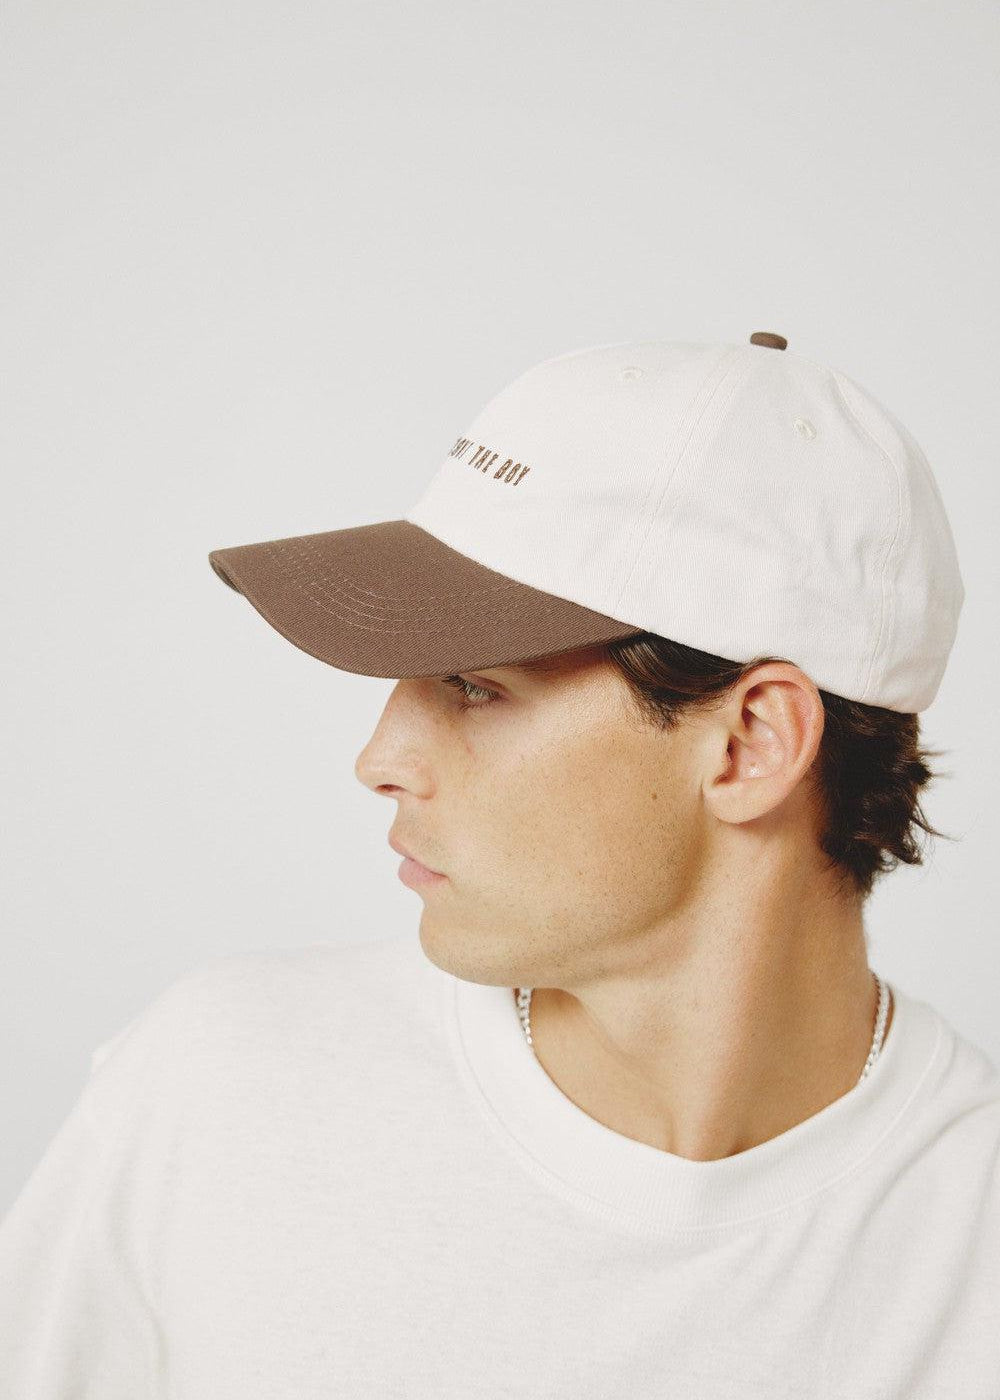 Mad About The Boy Dad Cap - Cream & Brown | Mad About The Boy | Mad About The Boy